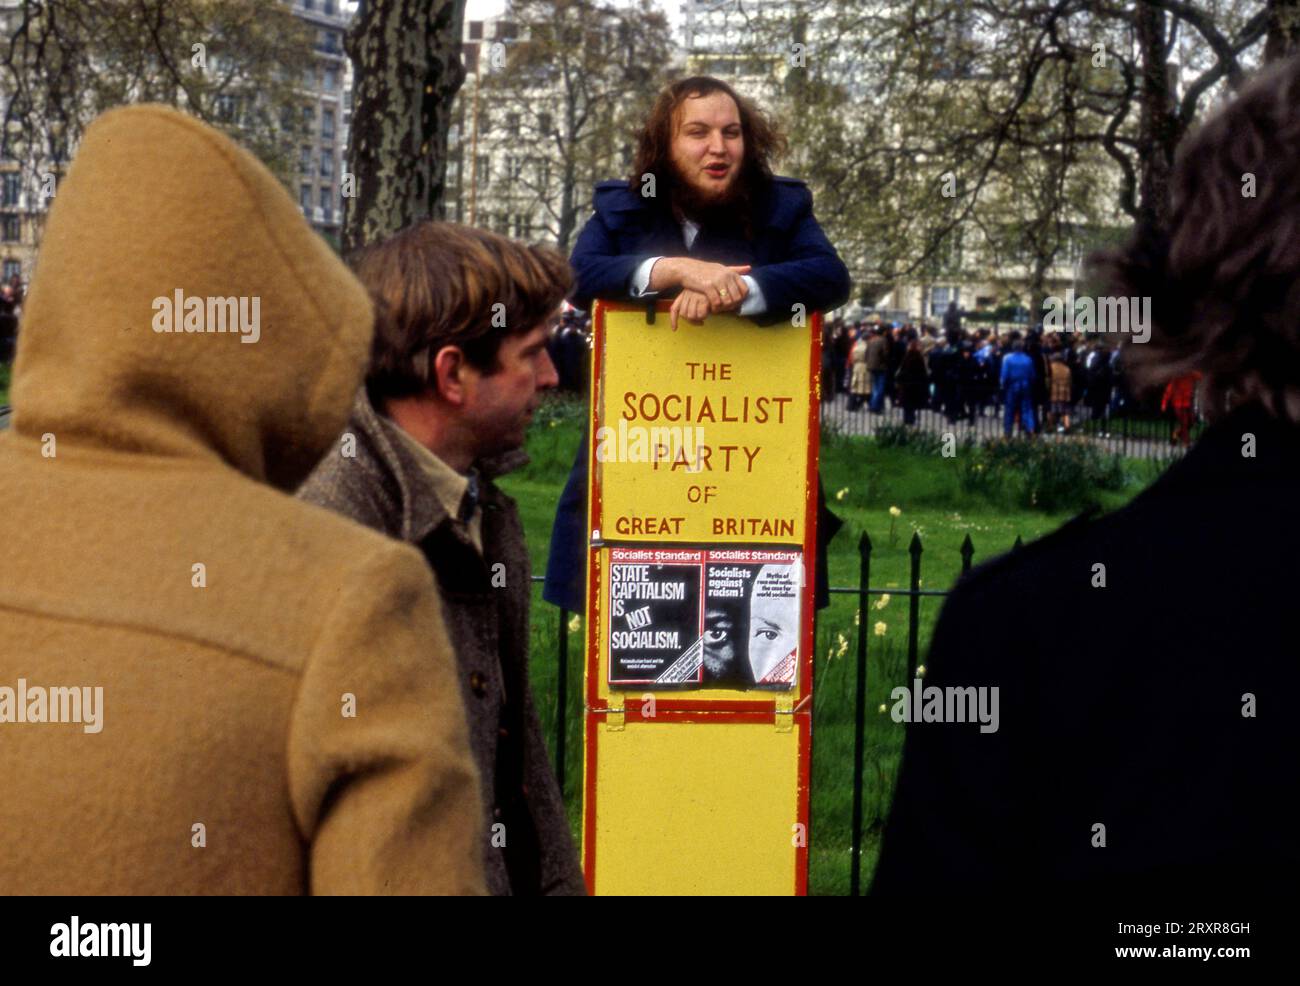 A man speaking for the Socialist Party at Speakers Corner in Hyde Park, London, England Stock Photo